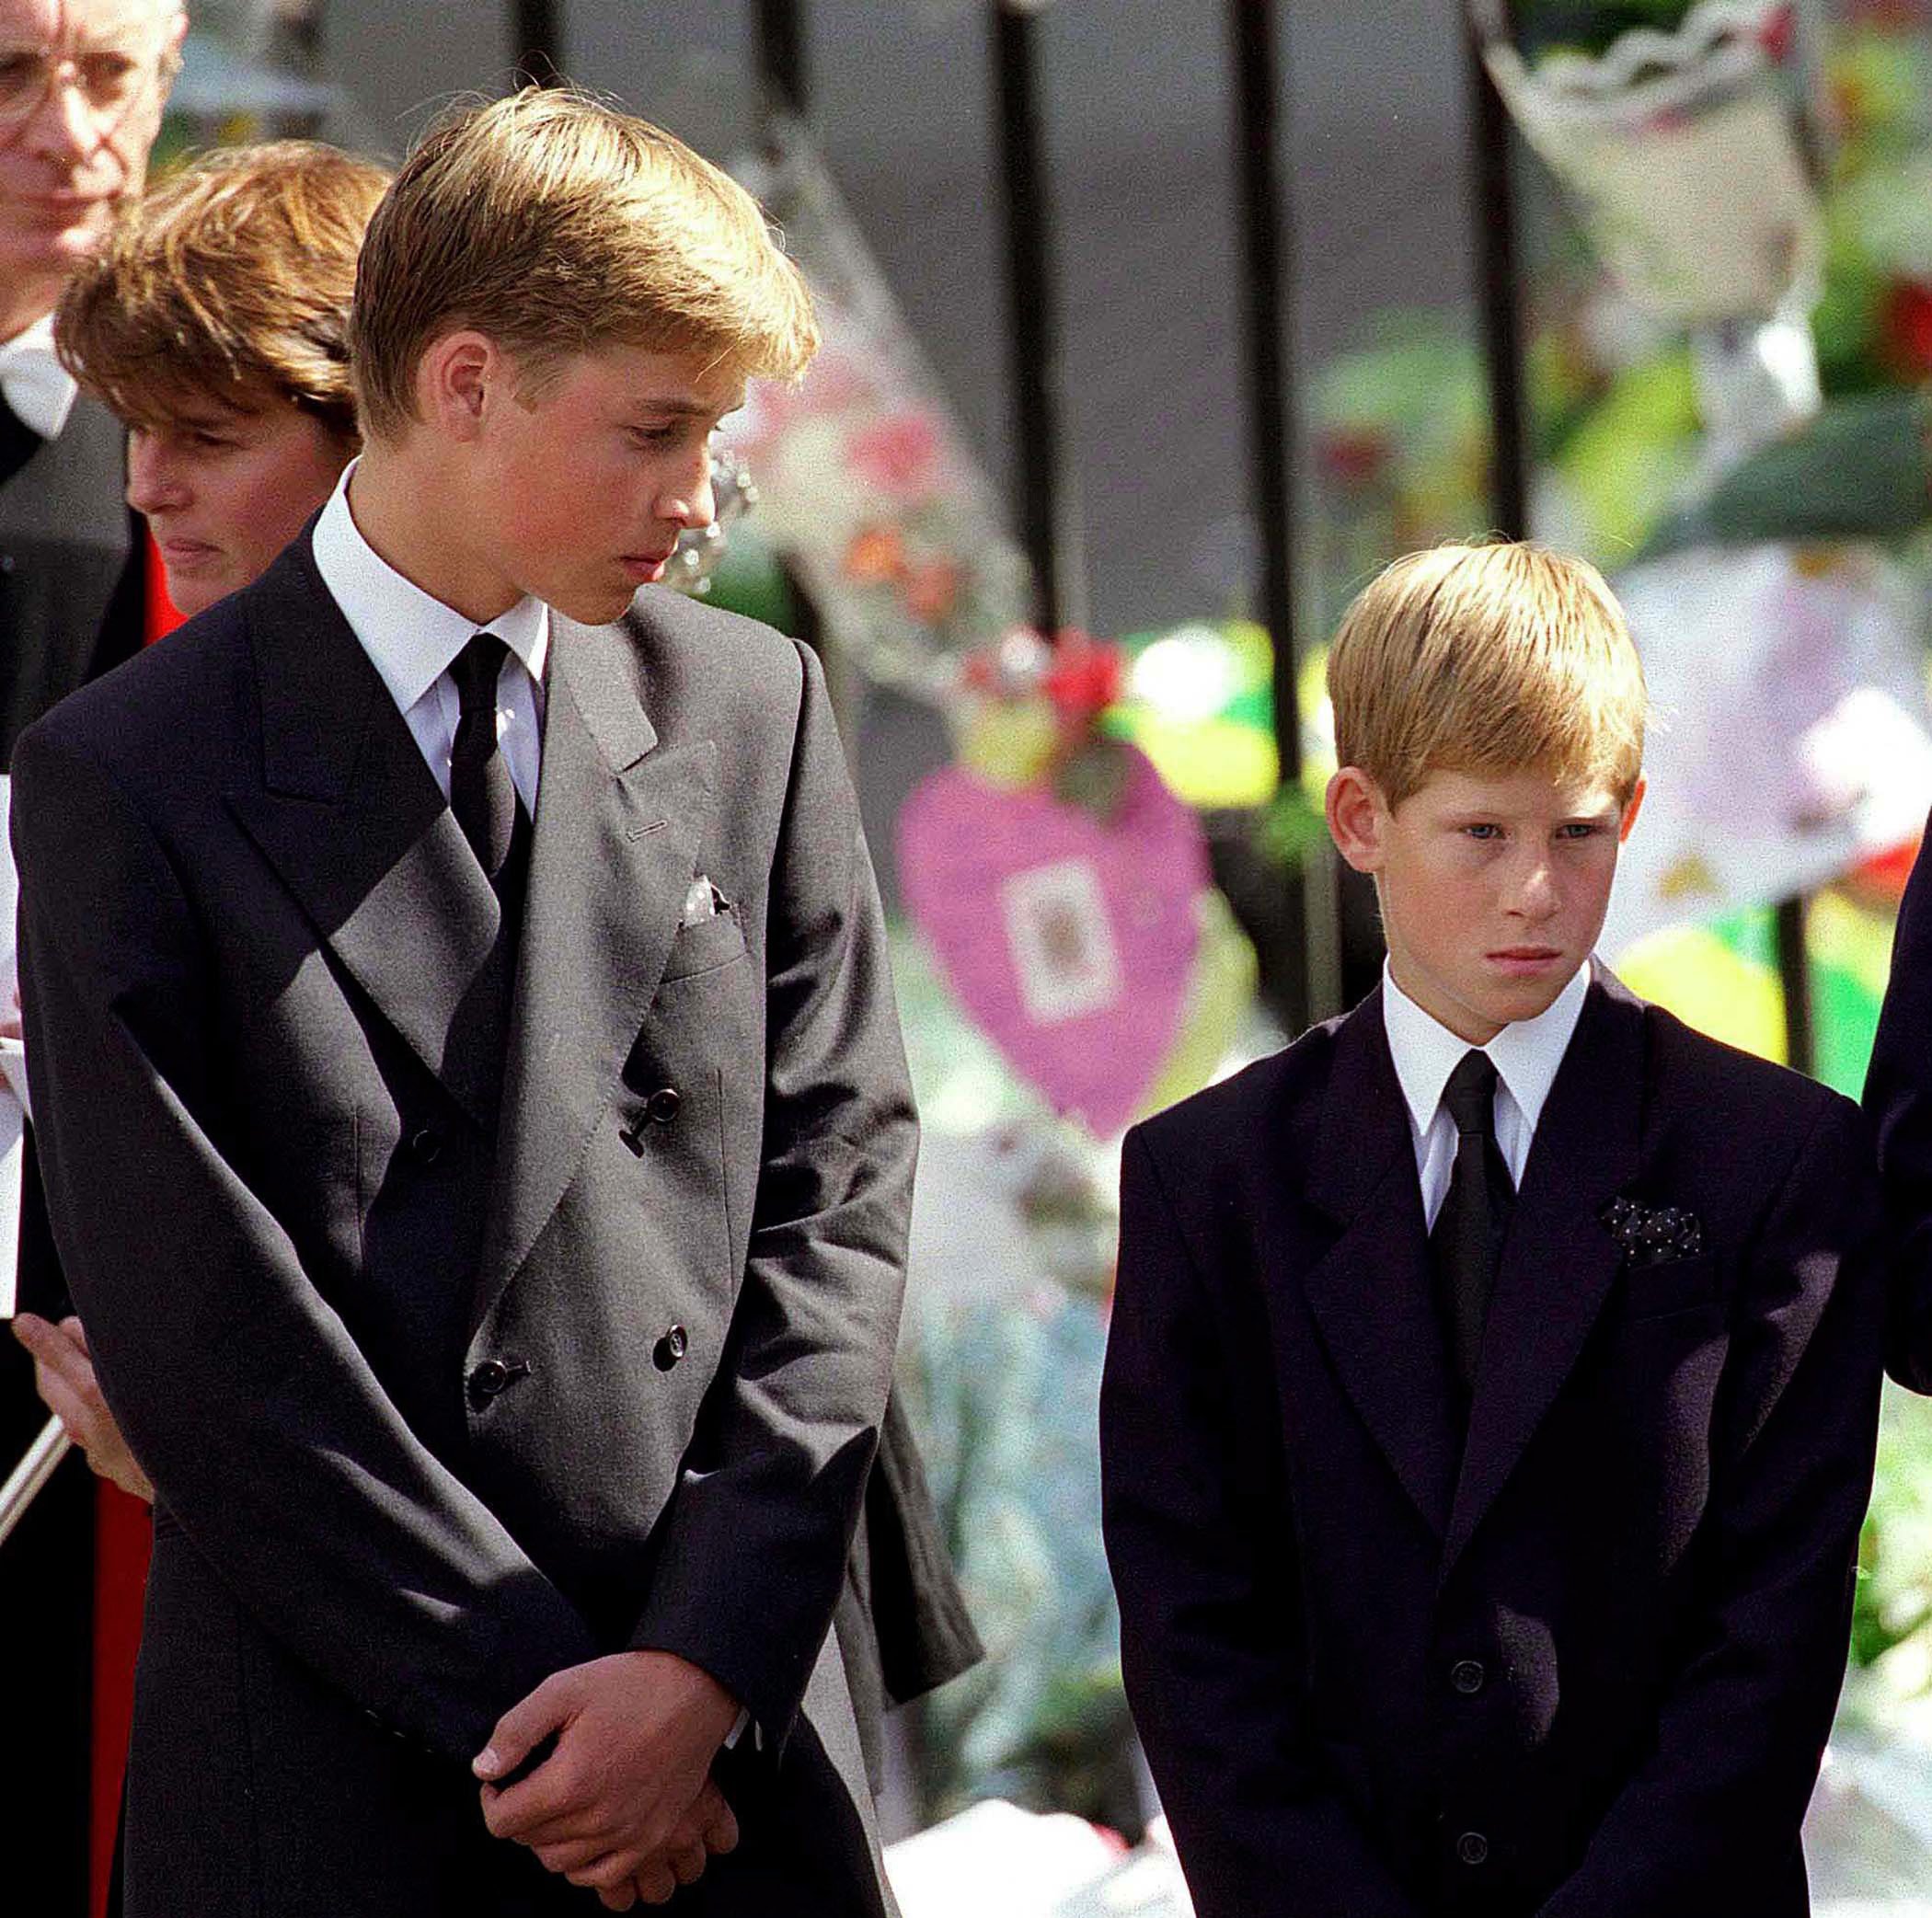 Prince William and Prince Harry standing outside Westminster Abbey at the funeral of their mother, Princess Diana on September 6, 1997 in London, England. / Source: Getty Images